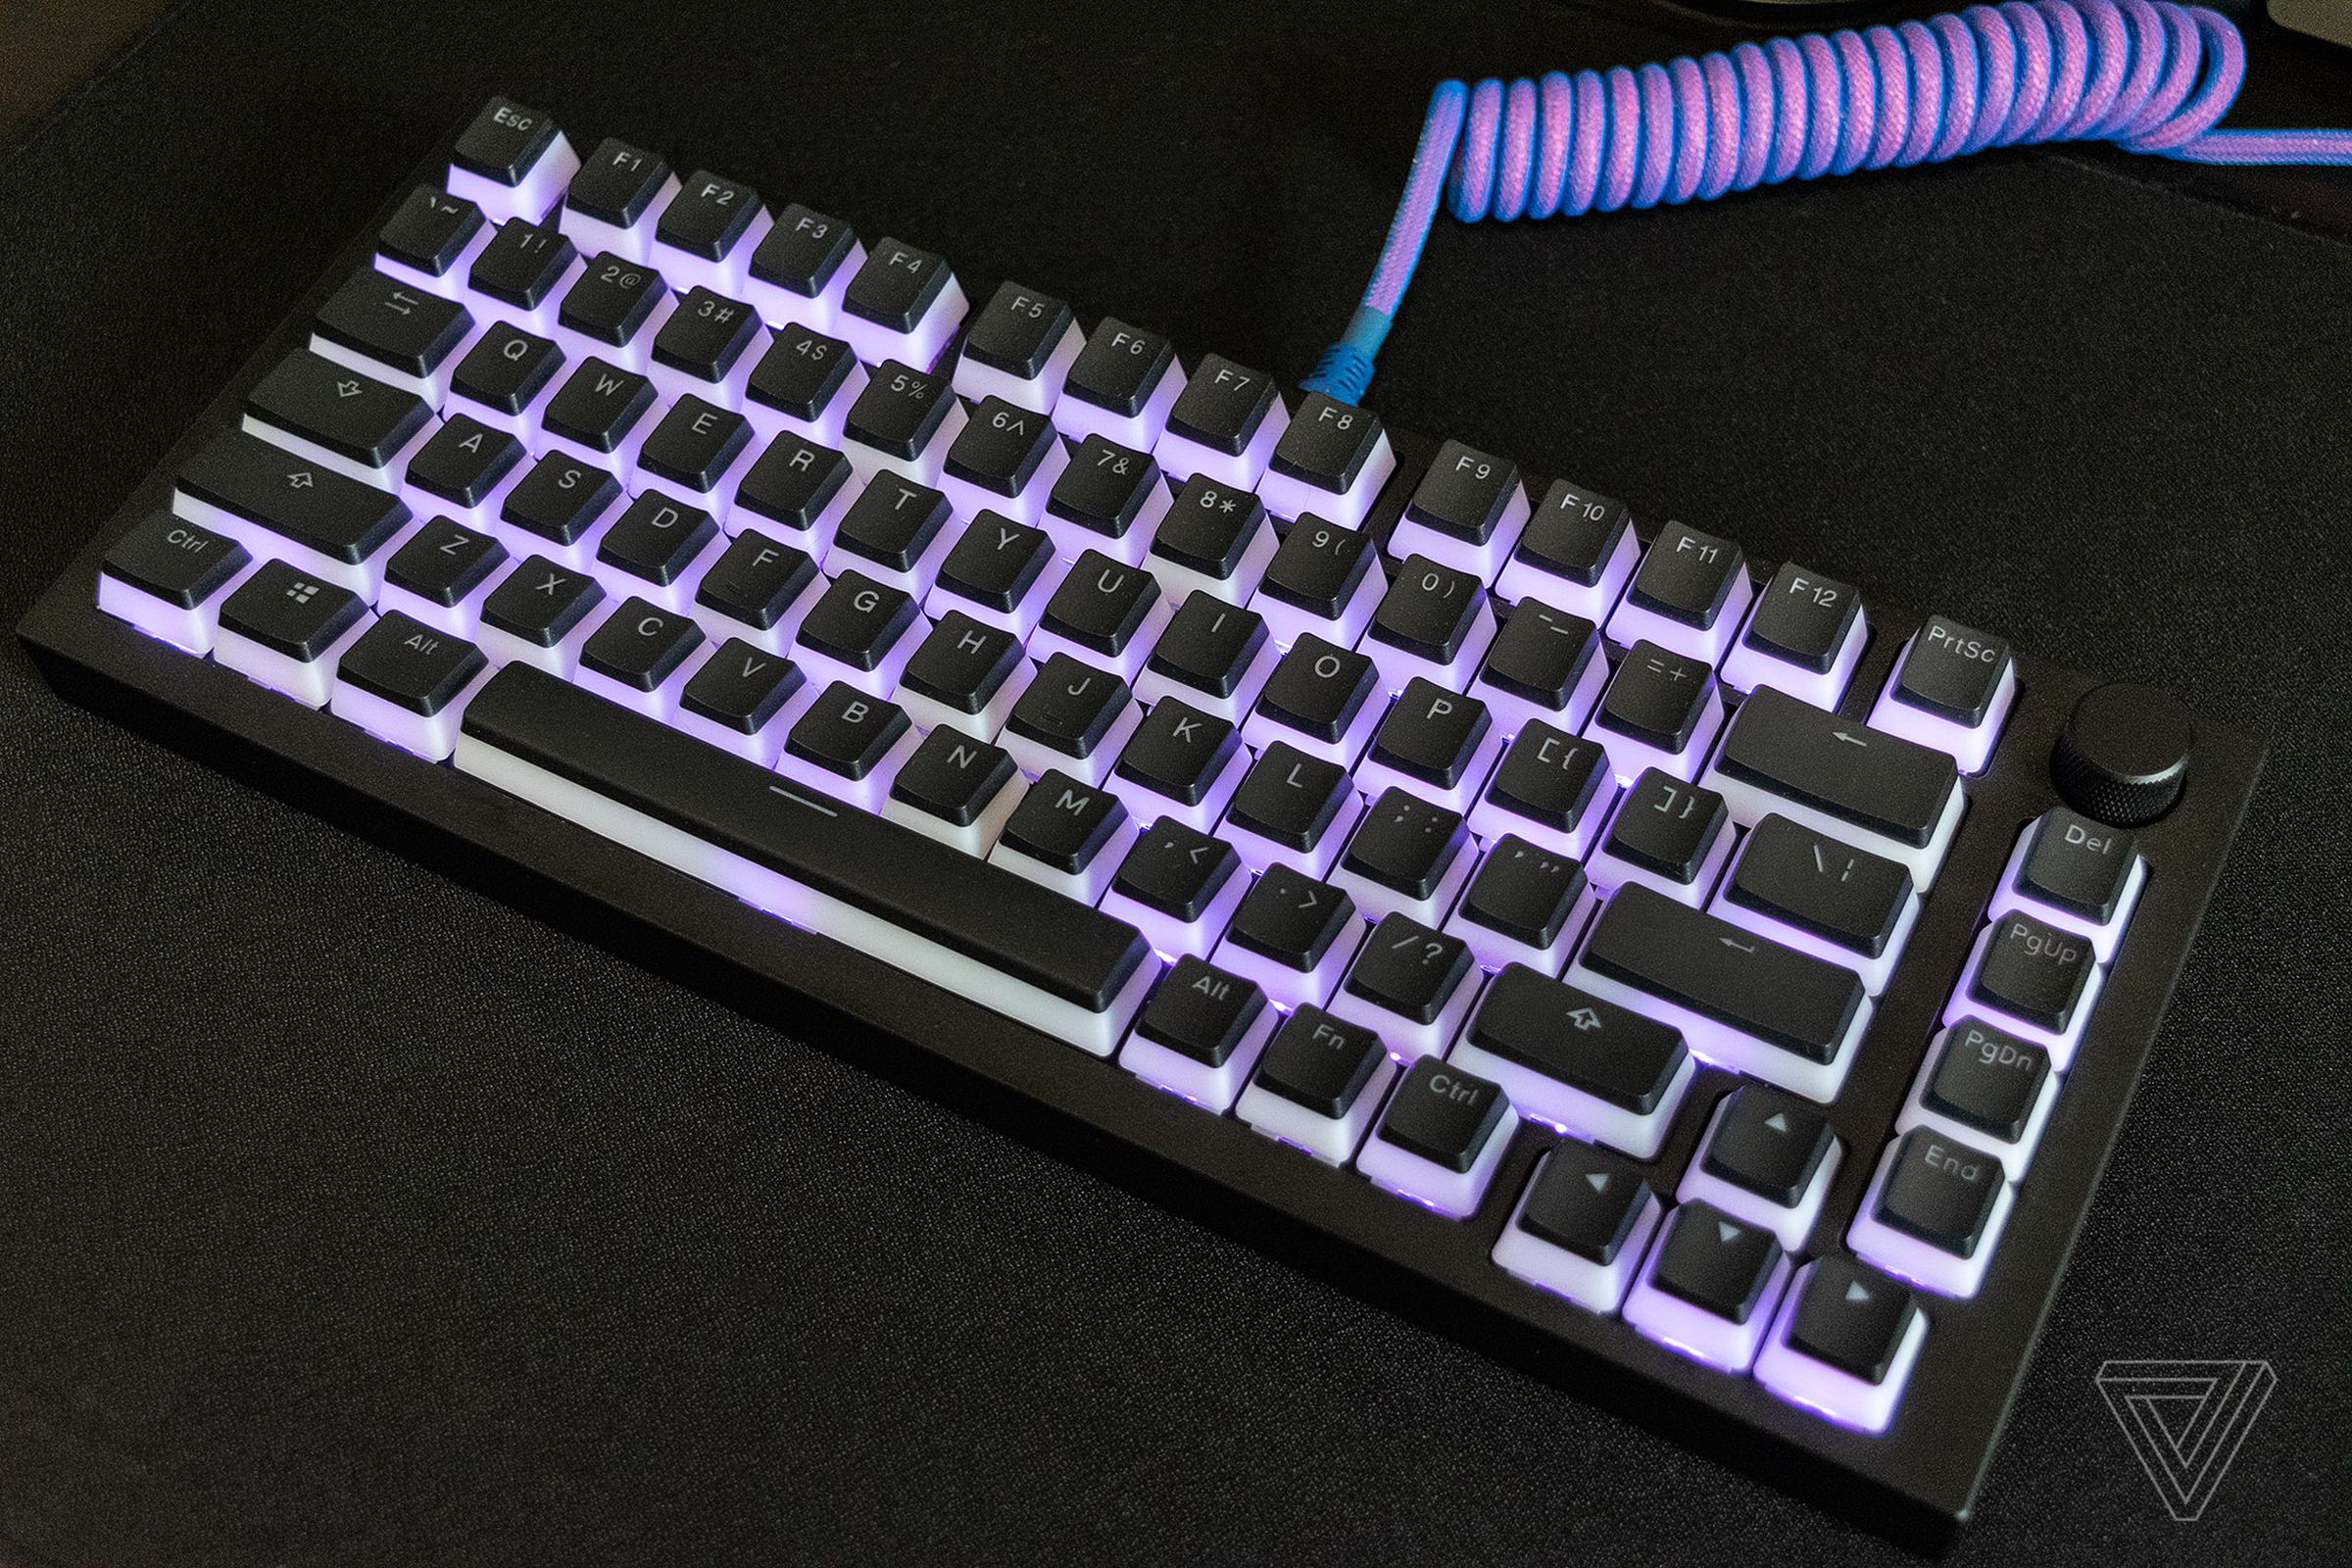 The GMMK Pro is a 75 percent keyboard that you put together yourself and has a super clean aesthetic.